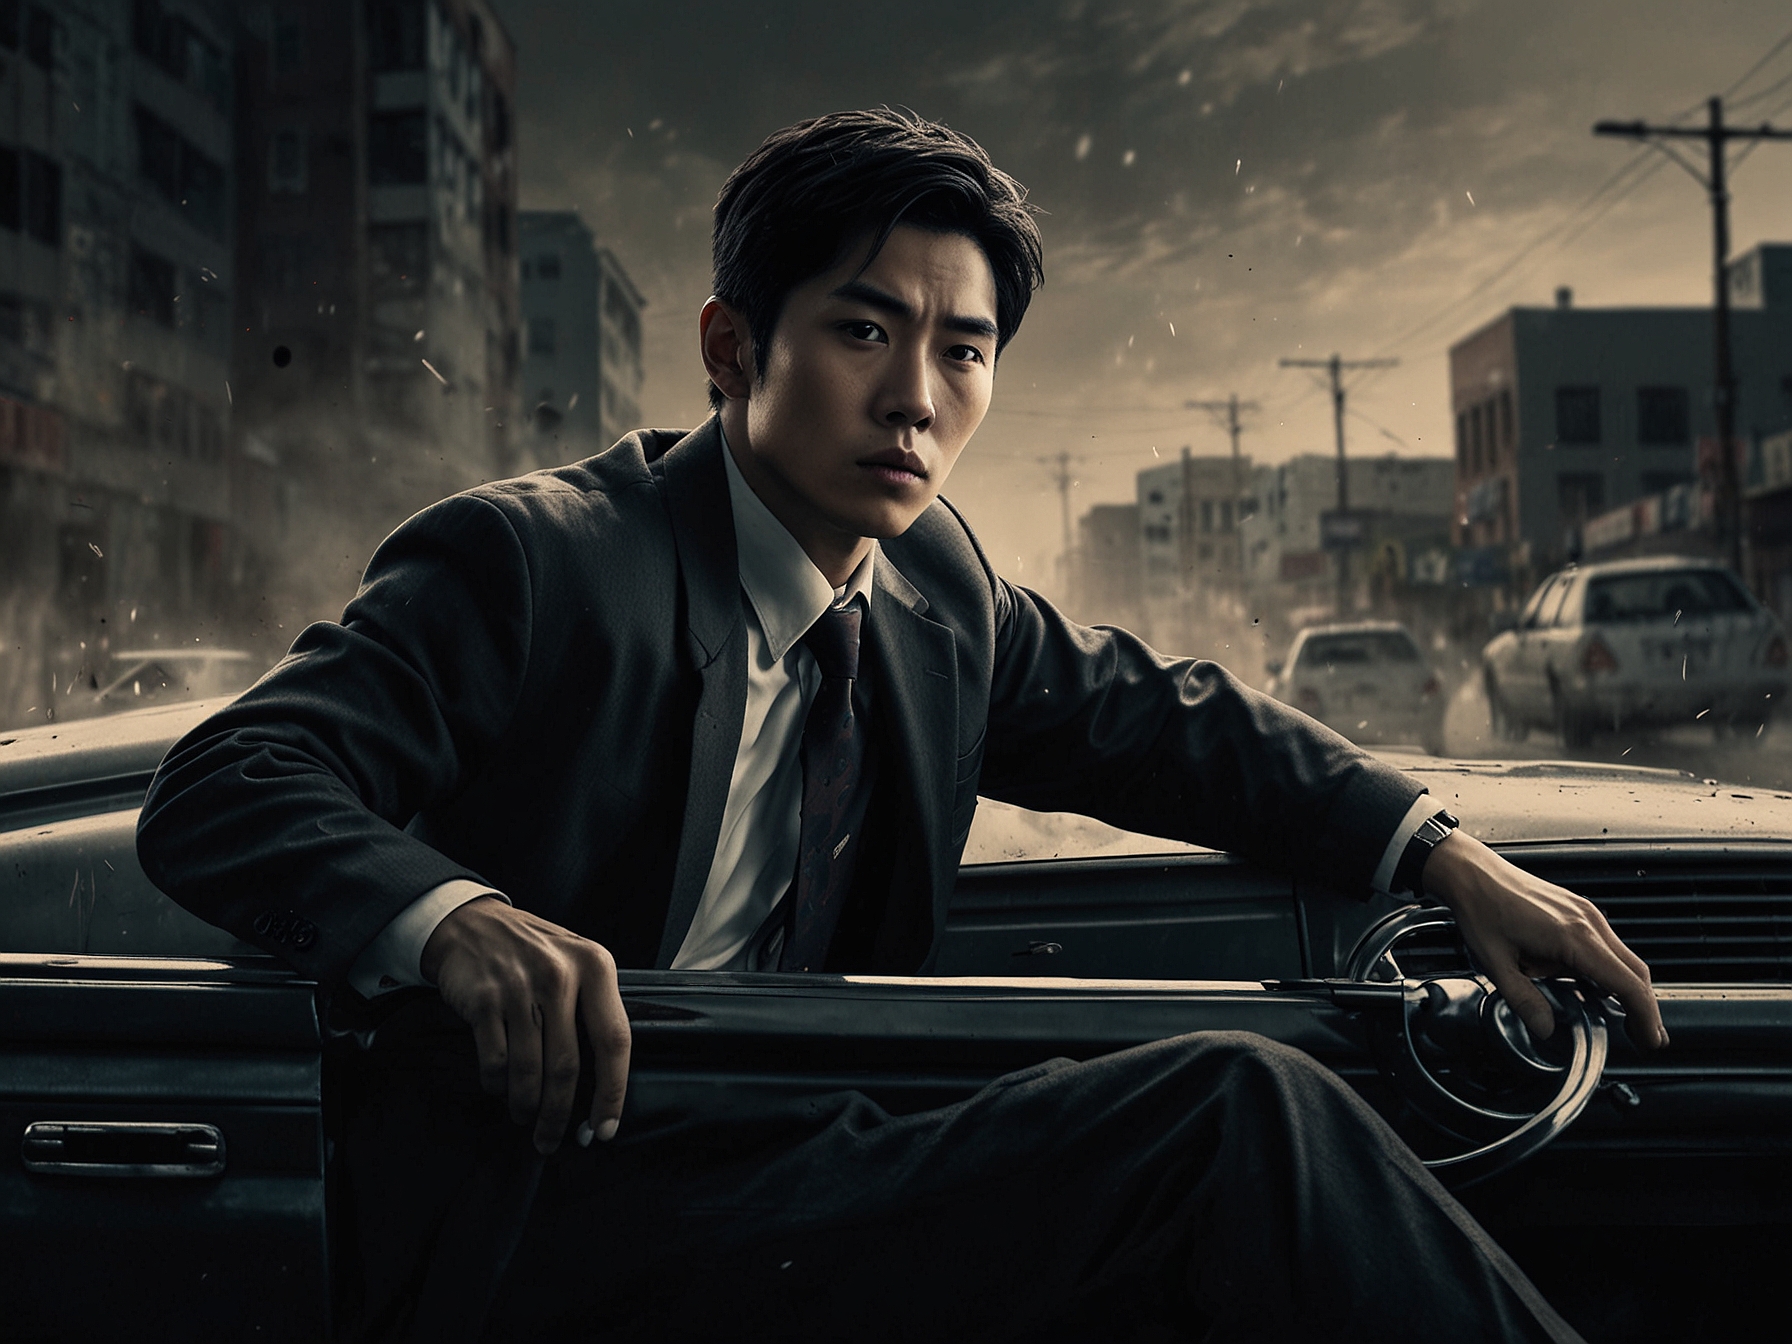 Lee Min-ki as Detective Kang expertly maneuvers through a thrilling car chase scene, capturing the intense action sequences that make 'Crash' visually appealing to viewers.